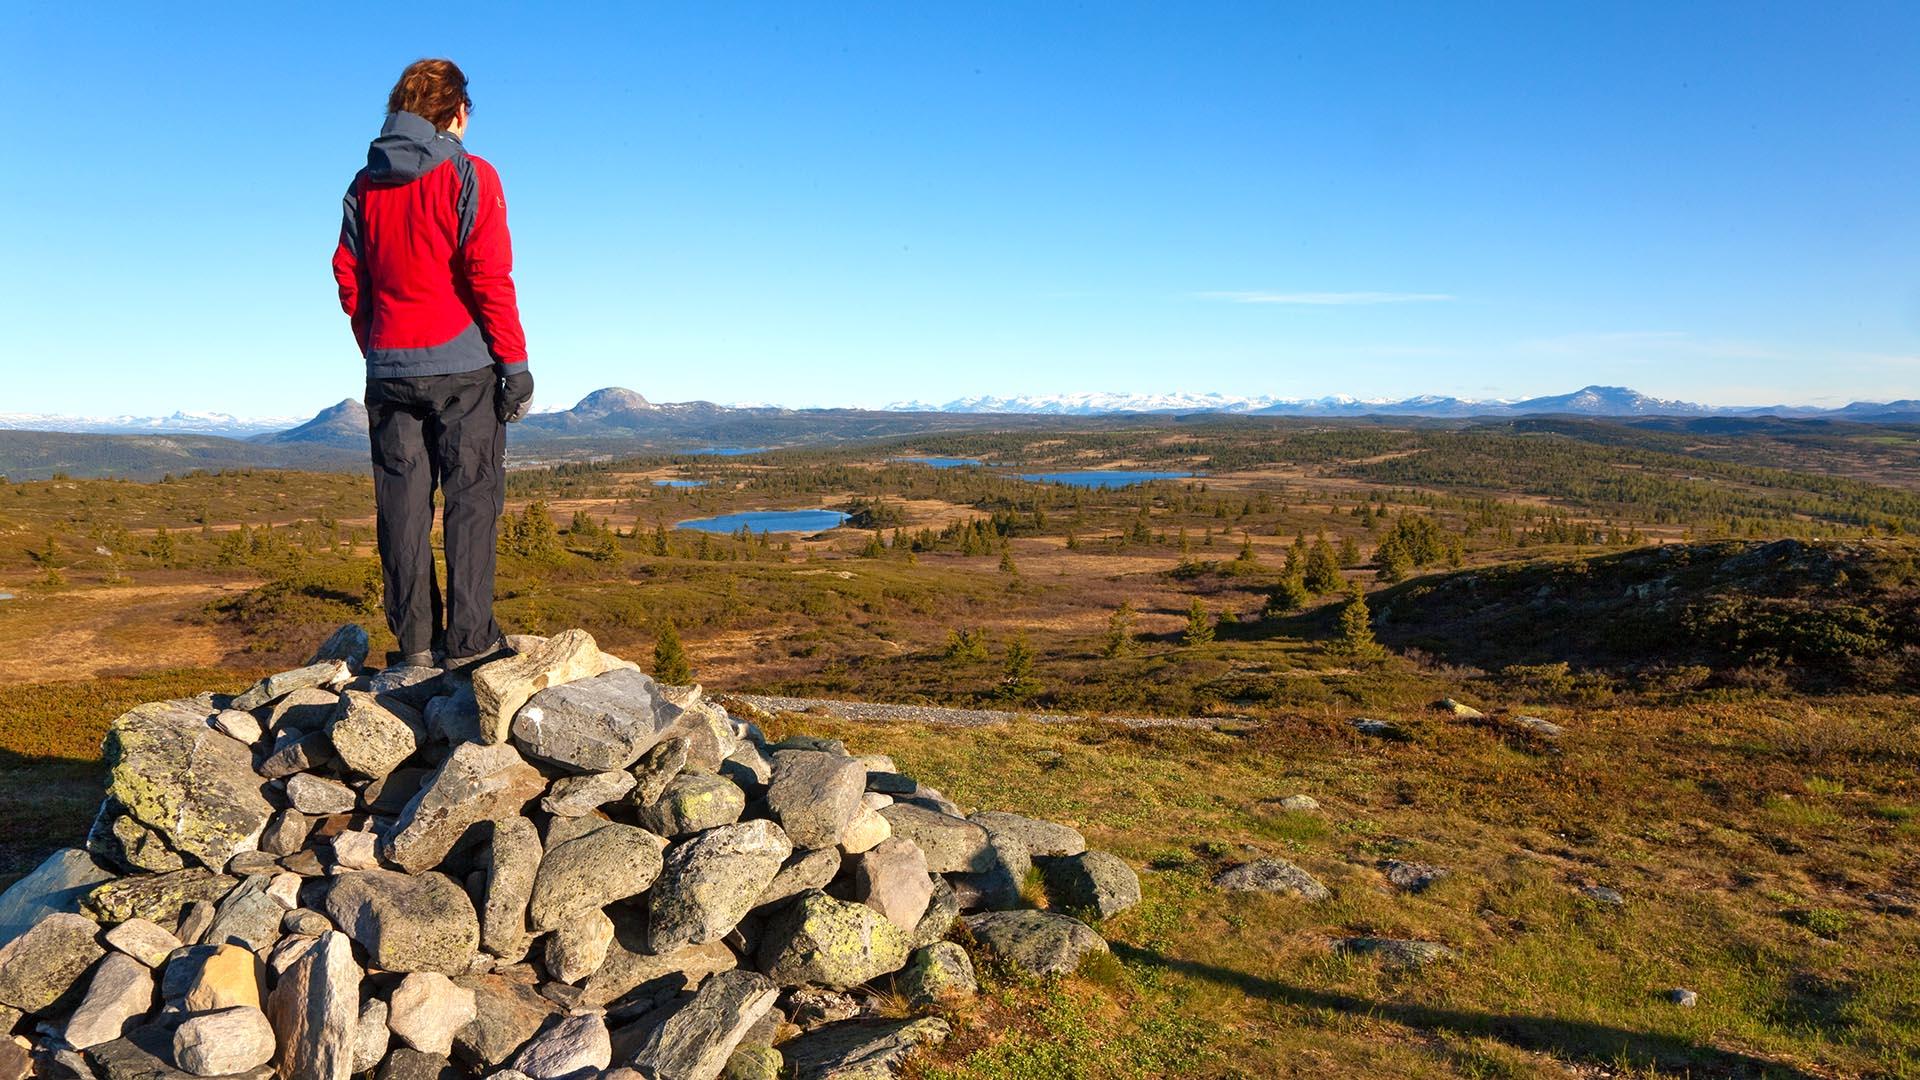 A hiker in a red jacket is standing on a pile of rocks in open low-mountain terrain over the treeline with view to distant lakes and mountains.